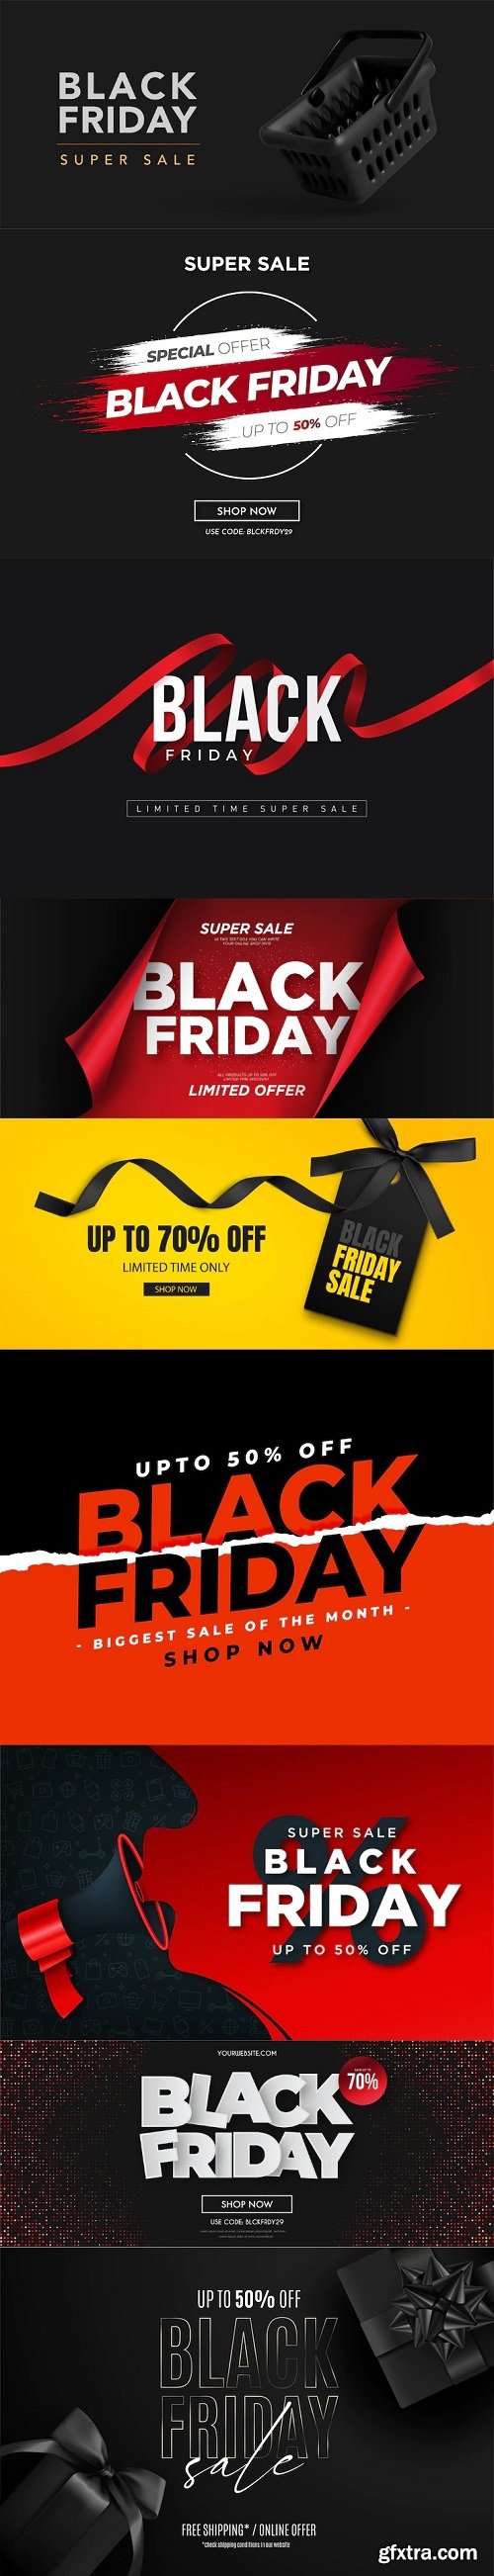 Black friday sale banners & backgrounds